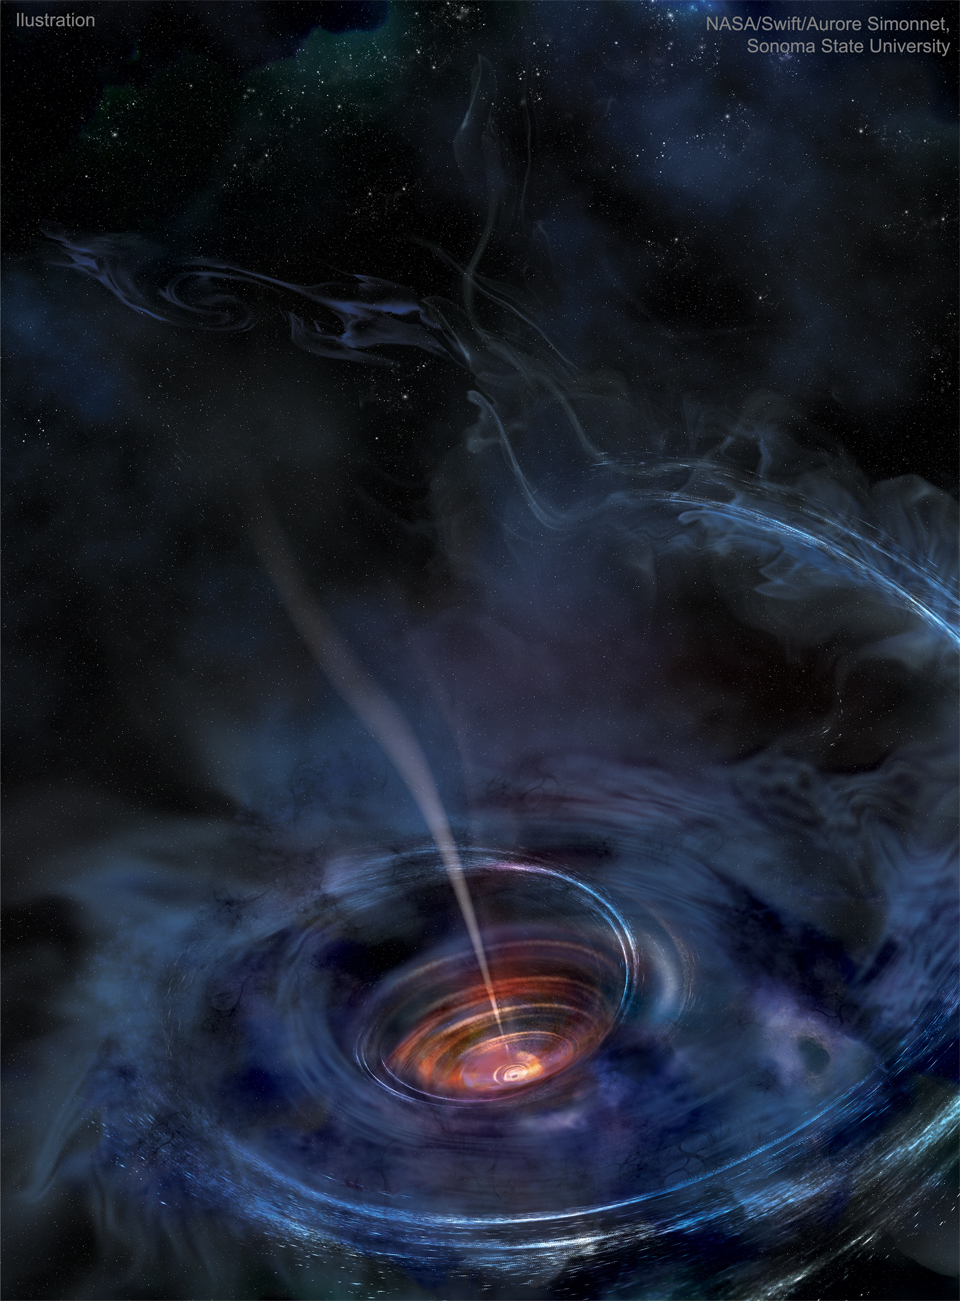 A swirling blue disk is illustrated with a deep
colorful indentation in the middle. A light colored
jet shoots out of this middle, from a small dot that
is a black hole. 
Please see the explanation for more detailed information.